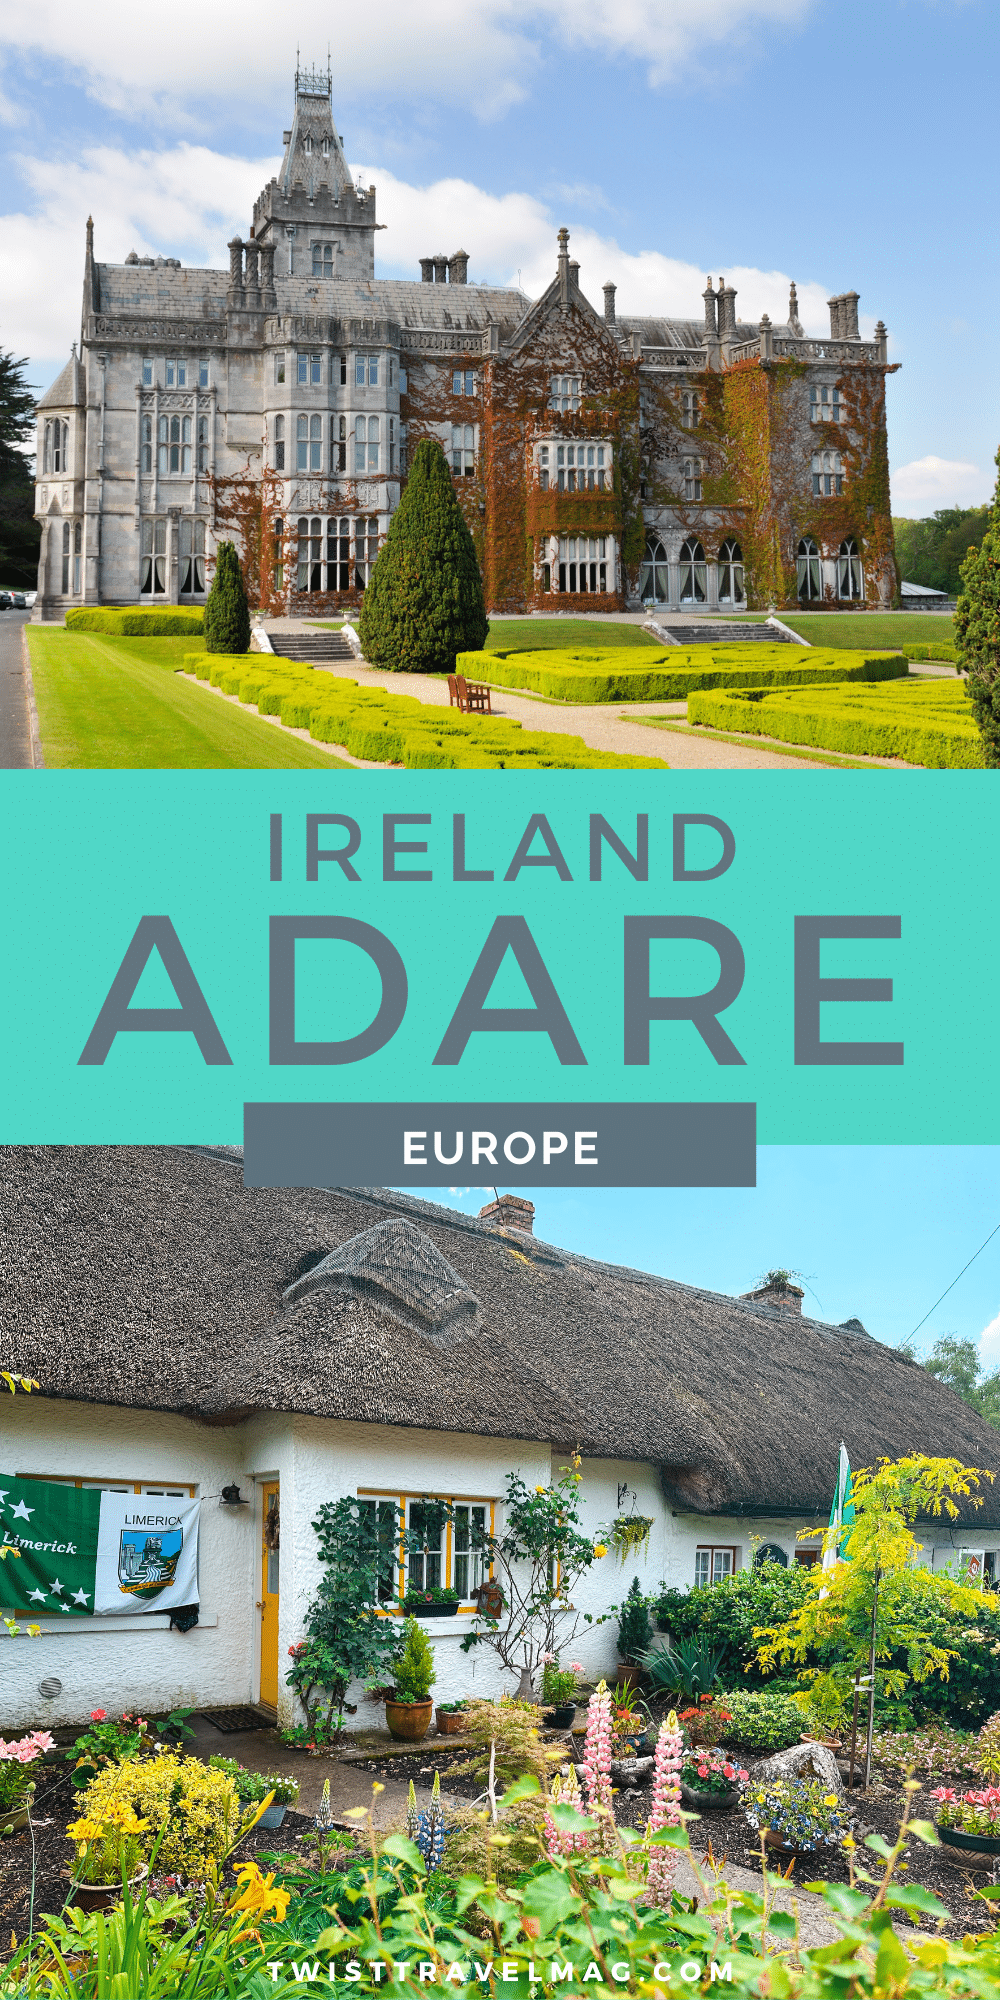 Things to do in Adare Ireland